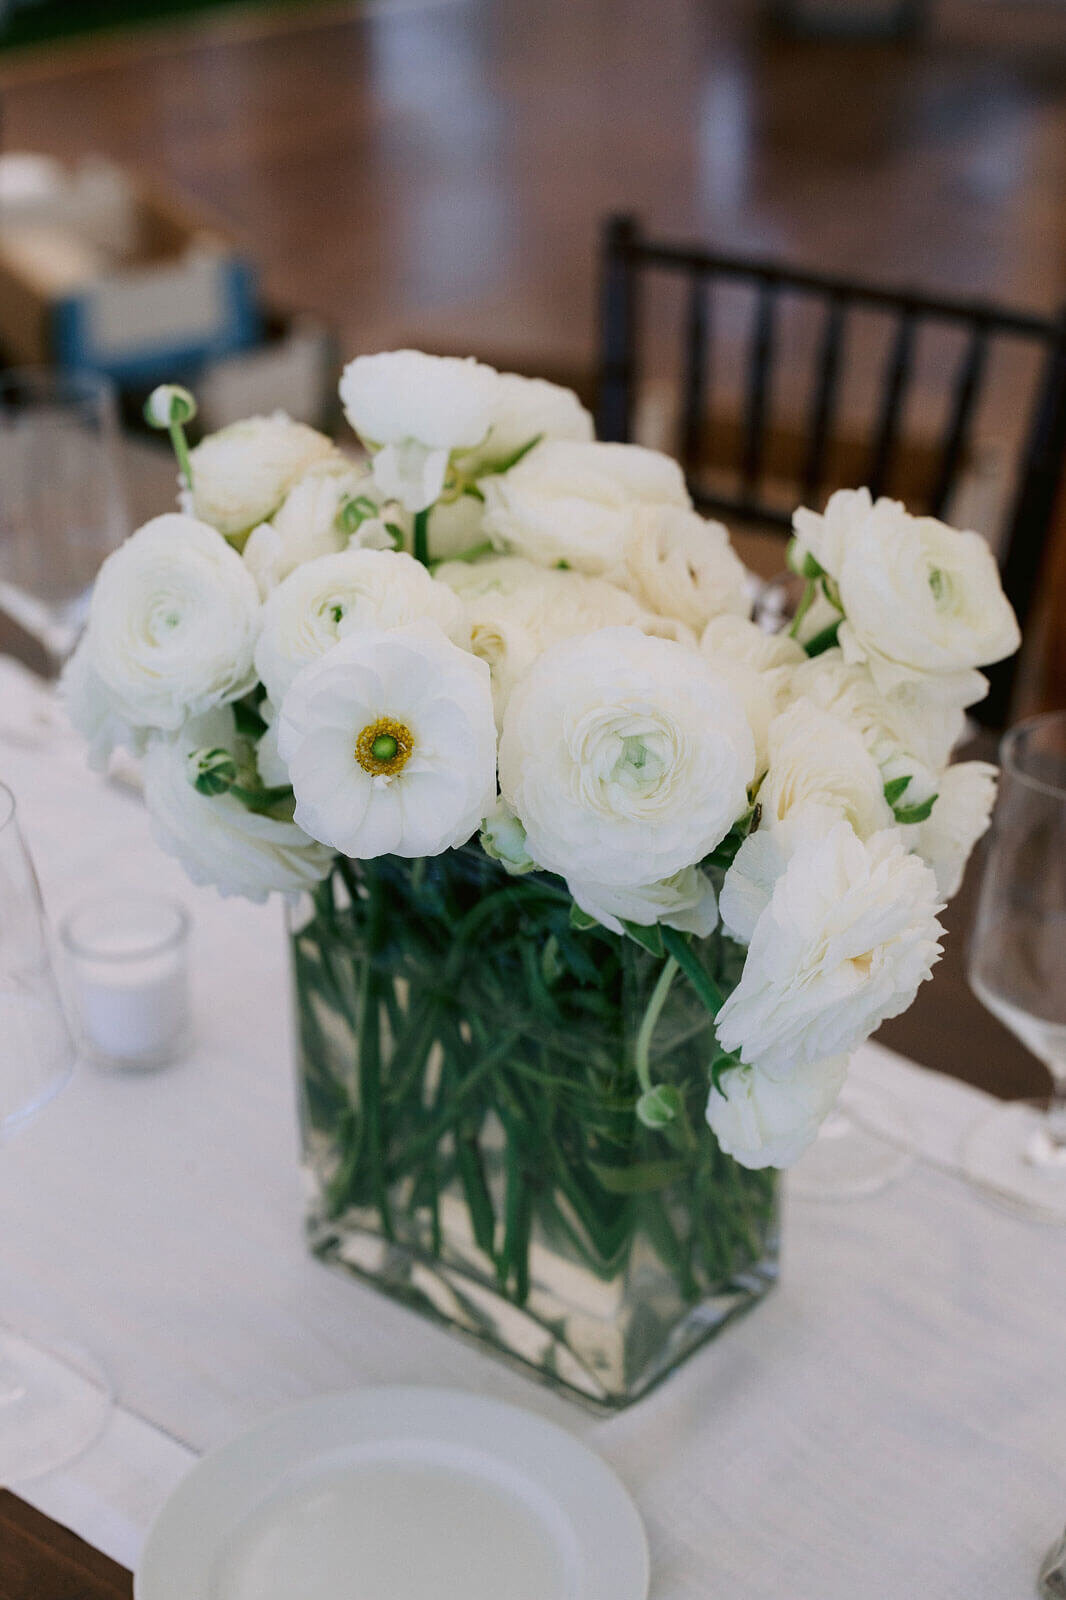 A centerpiece of white flowers in a glass vase on a dinner table for a wedding at Cape Cod Summer Tent, MA.